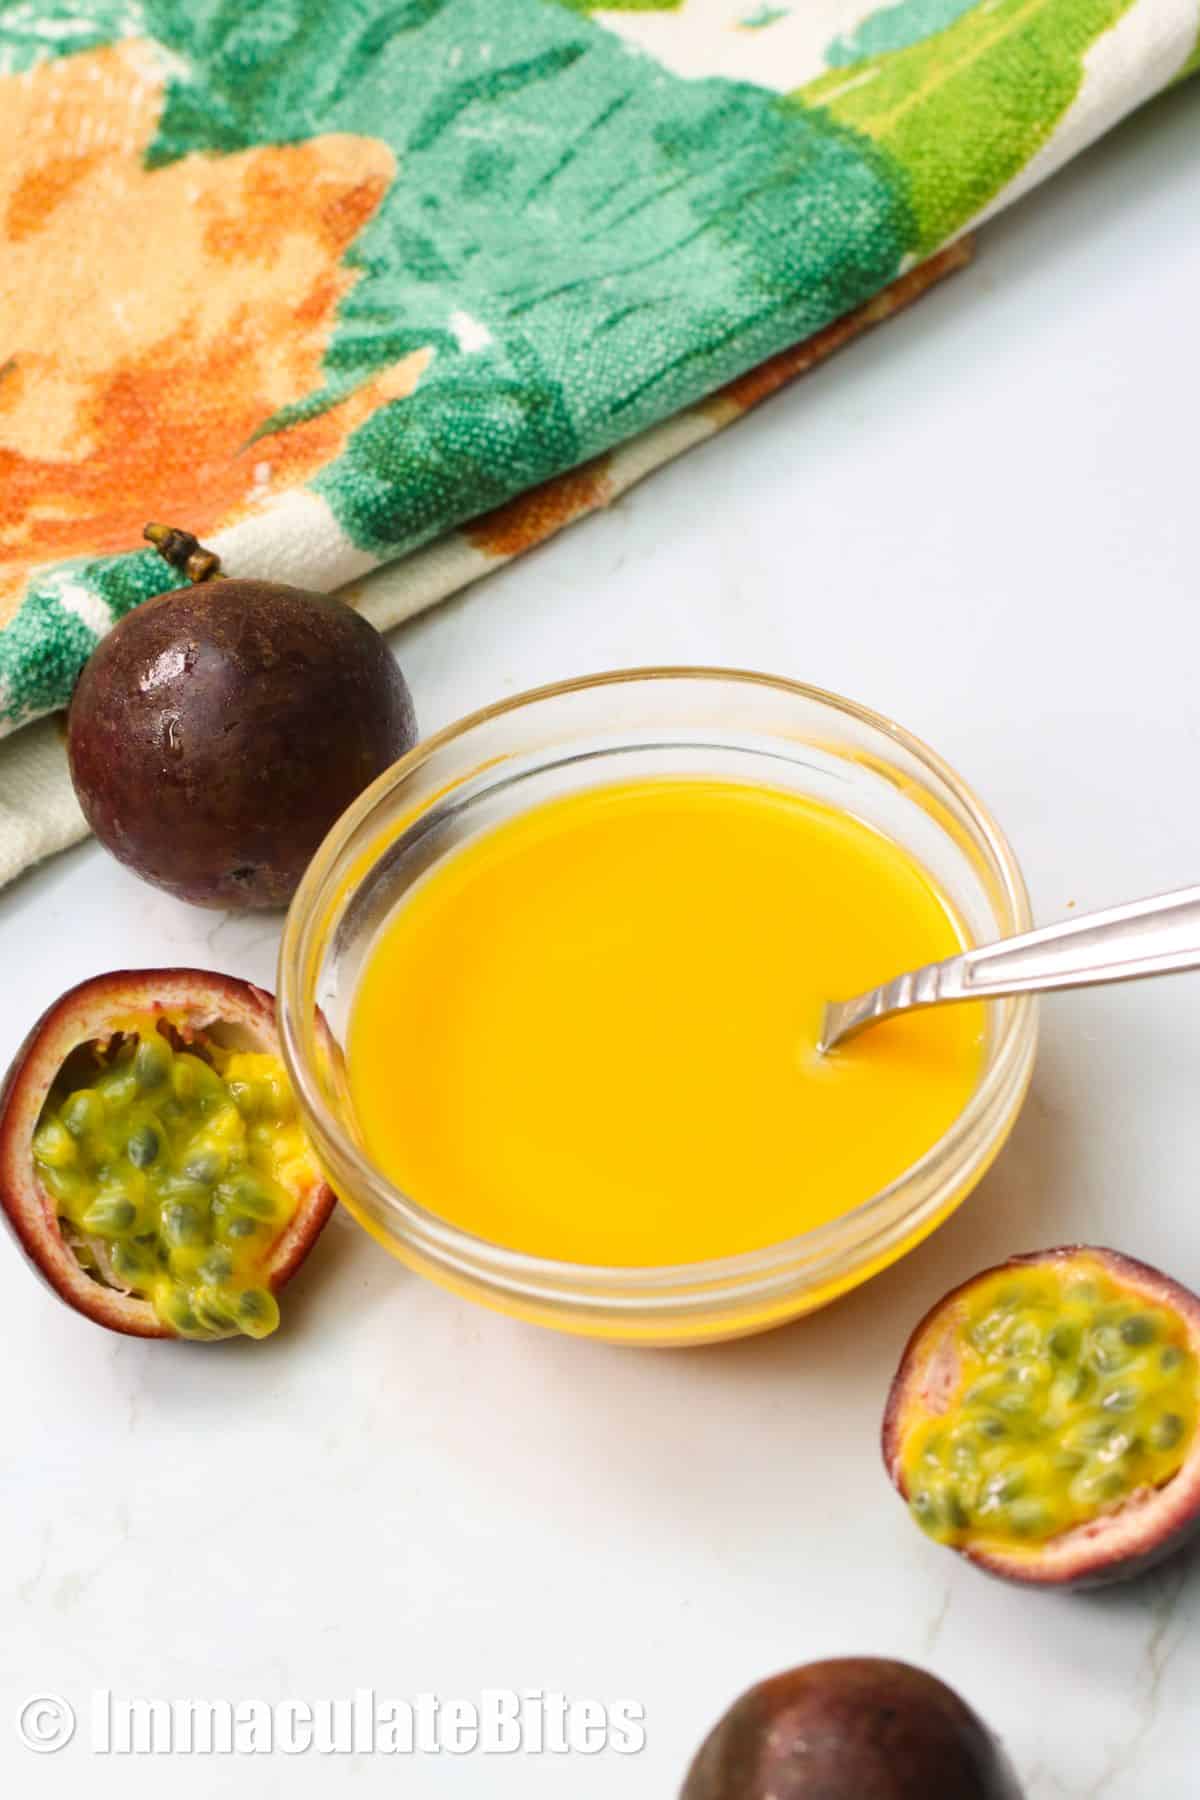 How to make Passion Fruit Puree